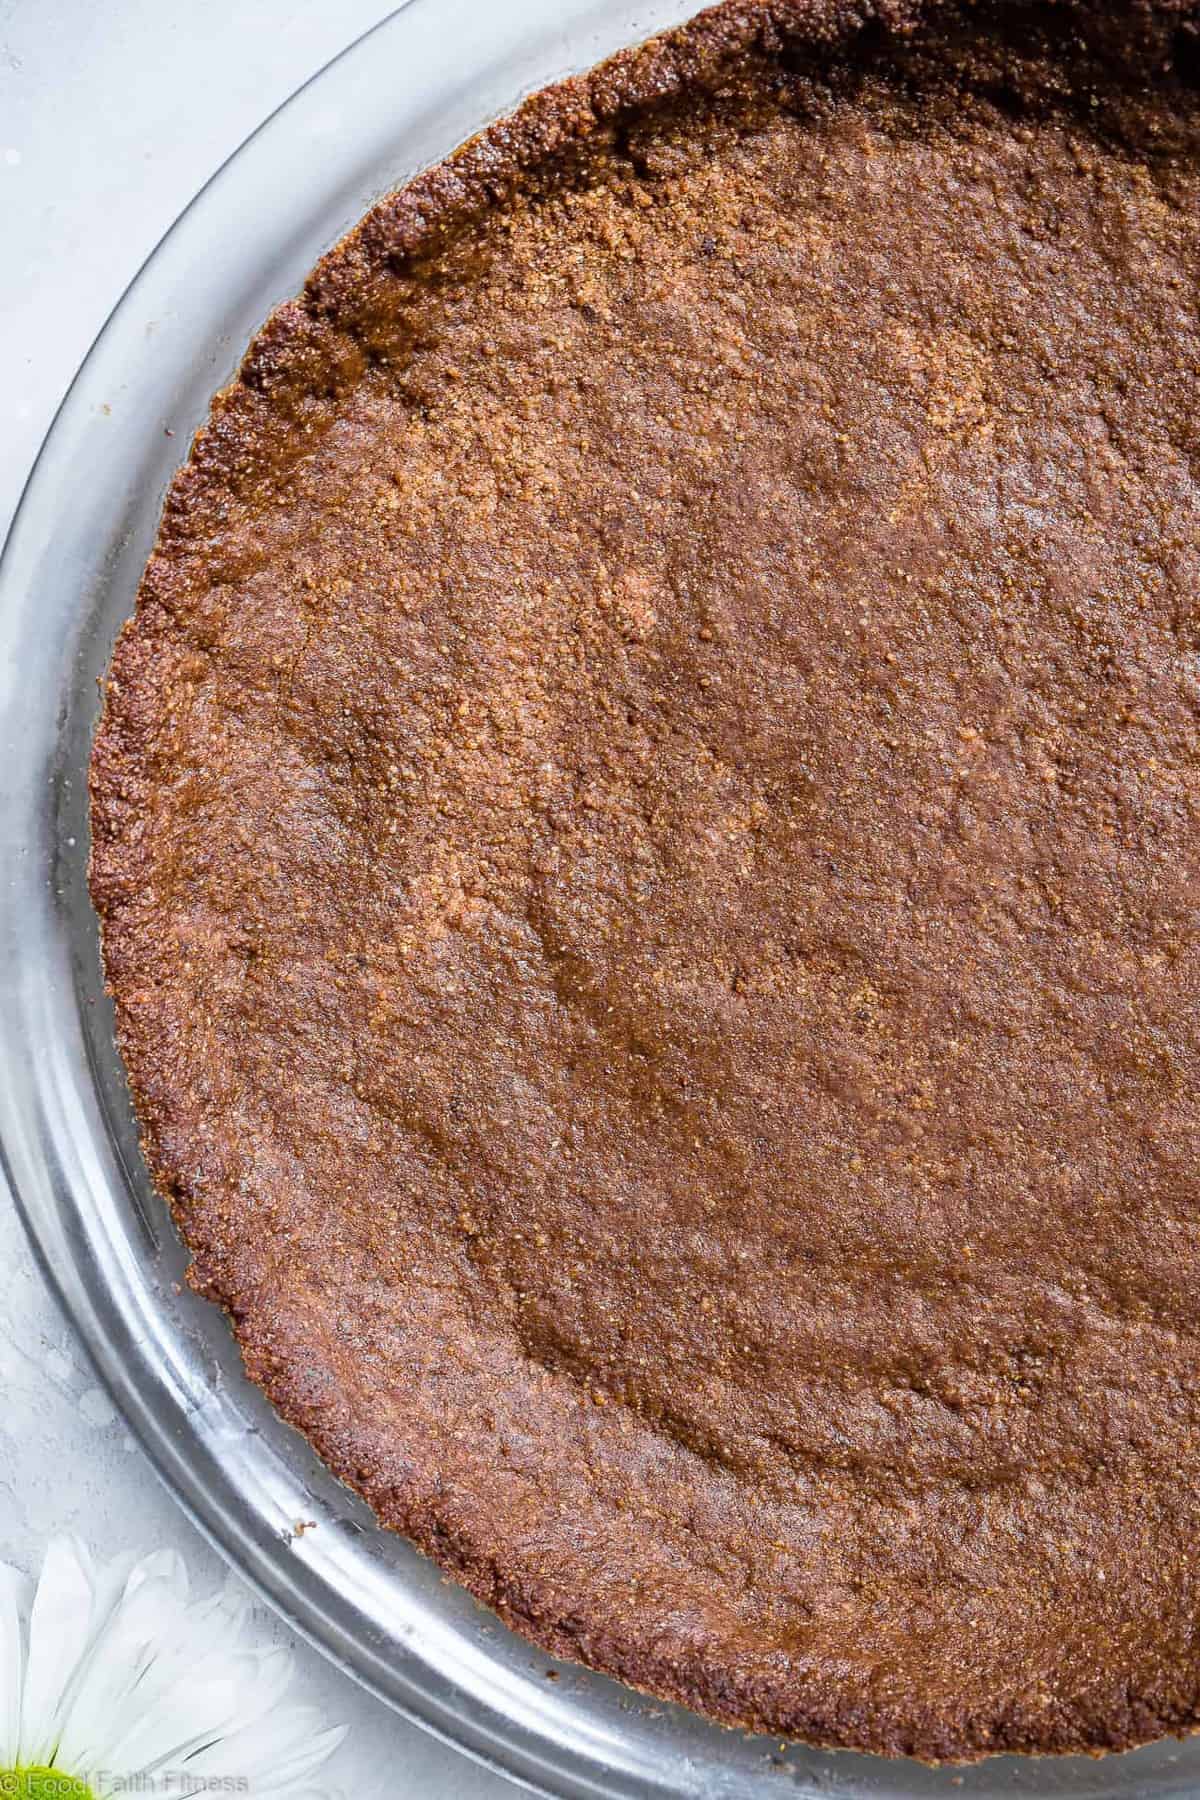 Low Carb Keto Gluten Free Graham Cracker Crust Recipe -  tastes like store bought but much better for you and sugar free! SO easy to make and perfect for SO many desserts! | #Foodfaithfitness | #Glutenfree #Keto #Lowcarb #Paleo #Sugarfree